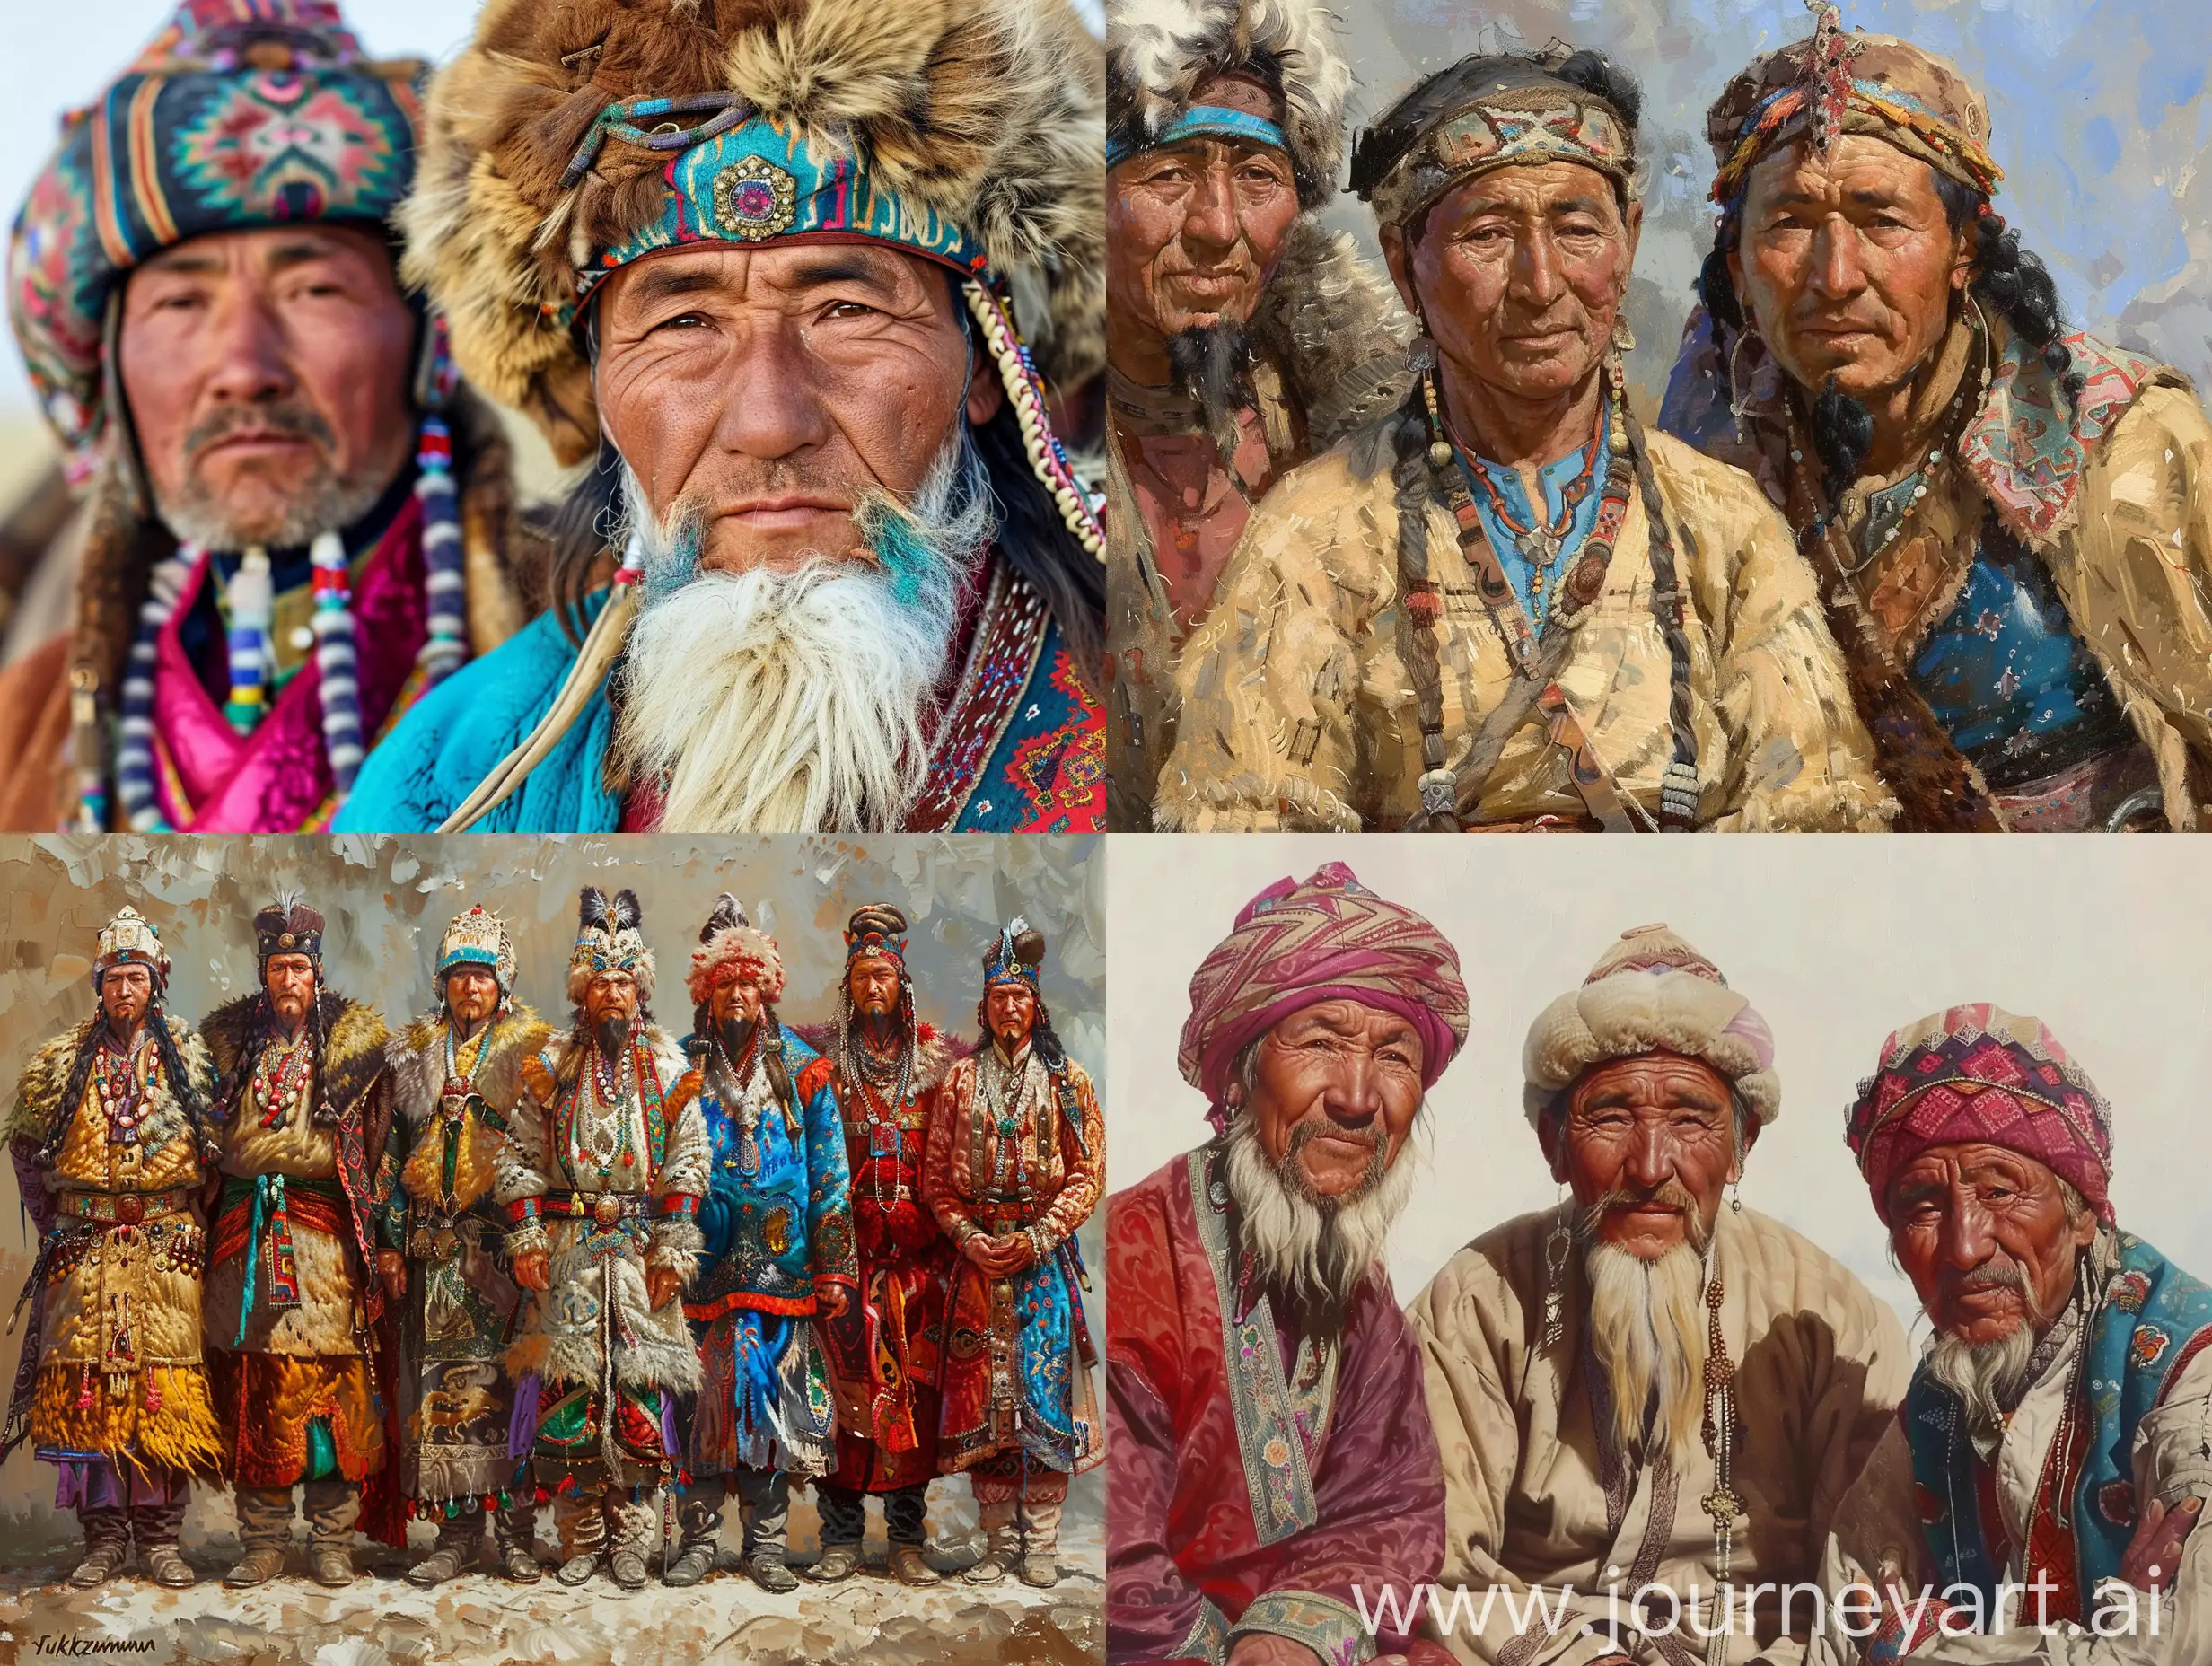 Turkmen-and-Yrk-Nomads-near-Kzlrmak-River-Traditional-Lifestyle-in-High-Quality-Mongolian-Style